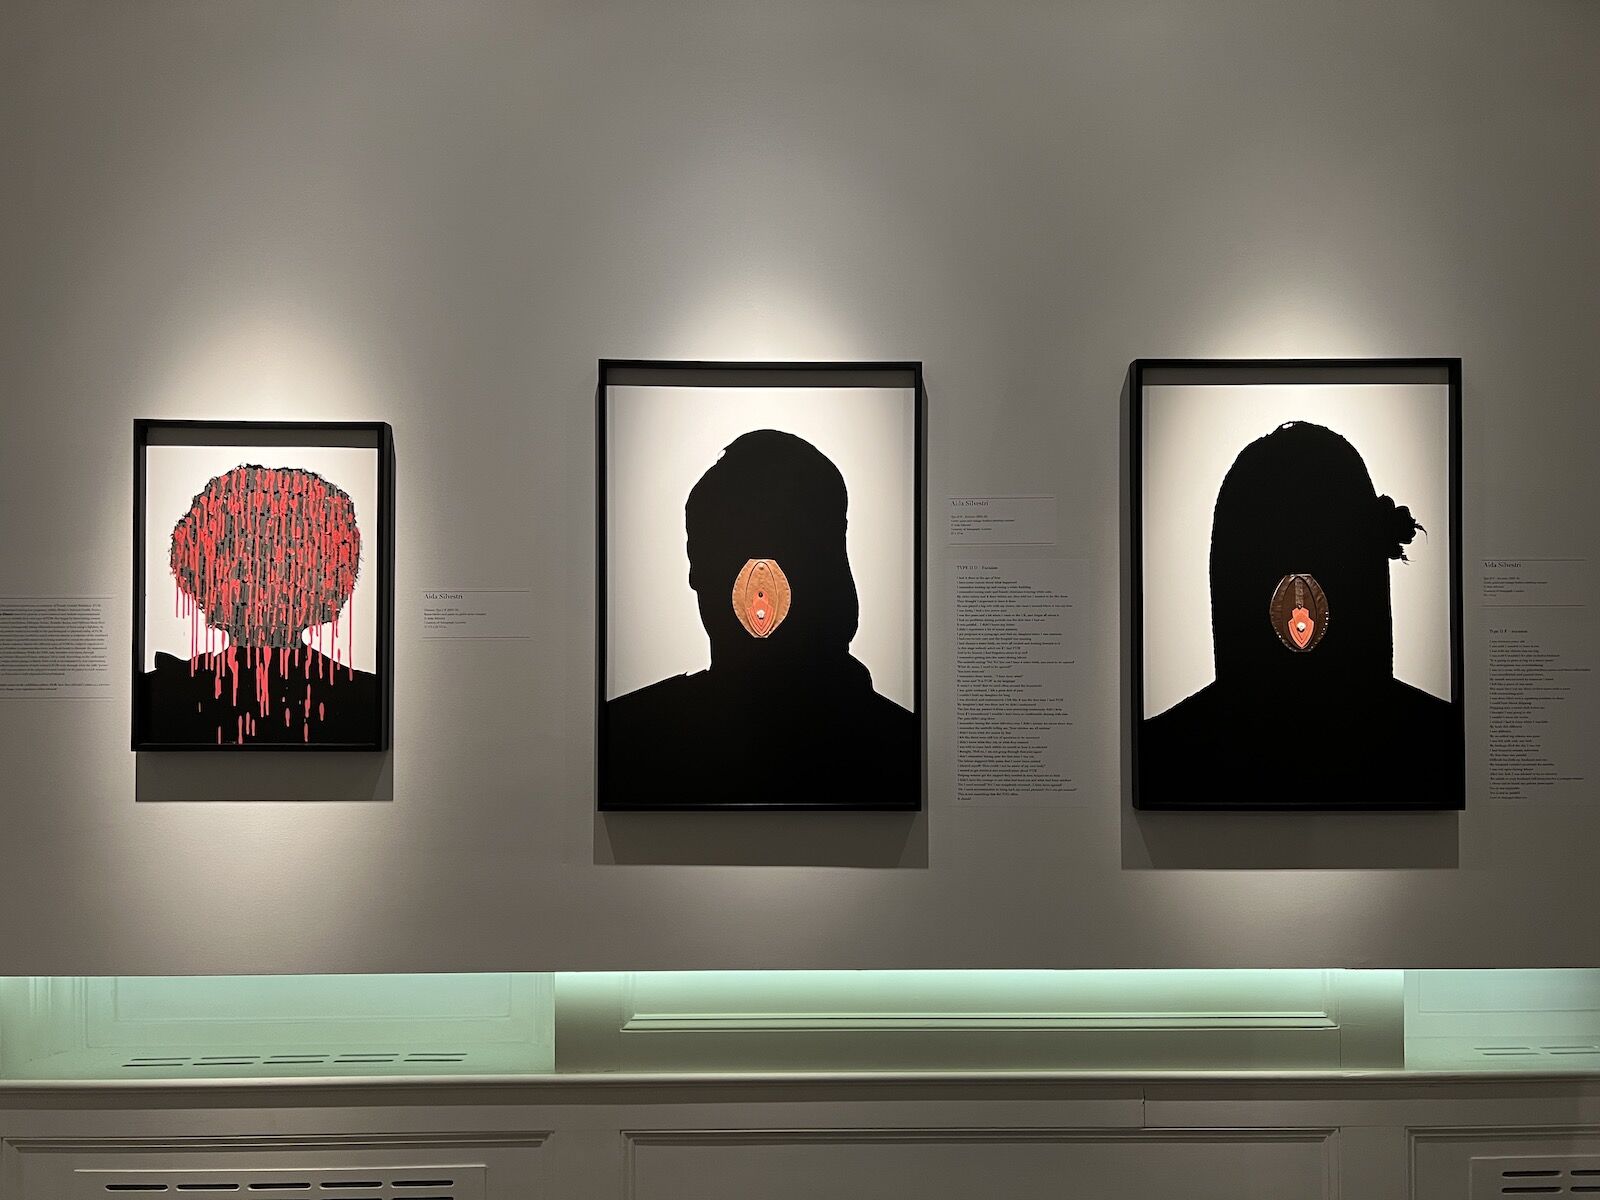 Silhouetted portraits by Aida Silvestri. As a survivor of female gential mutilation (FGM) herself, Silvestri interviewed other survivors and then created potraits that depict the types of FGM they experienced. This exhibit can be seen at the Museum of Sex in NYC